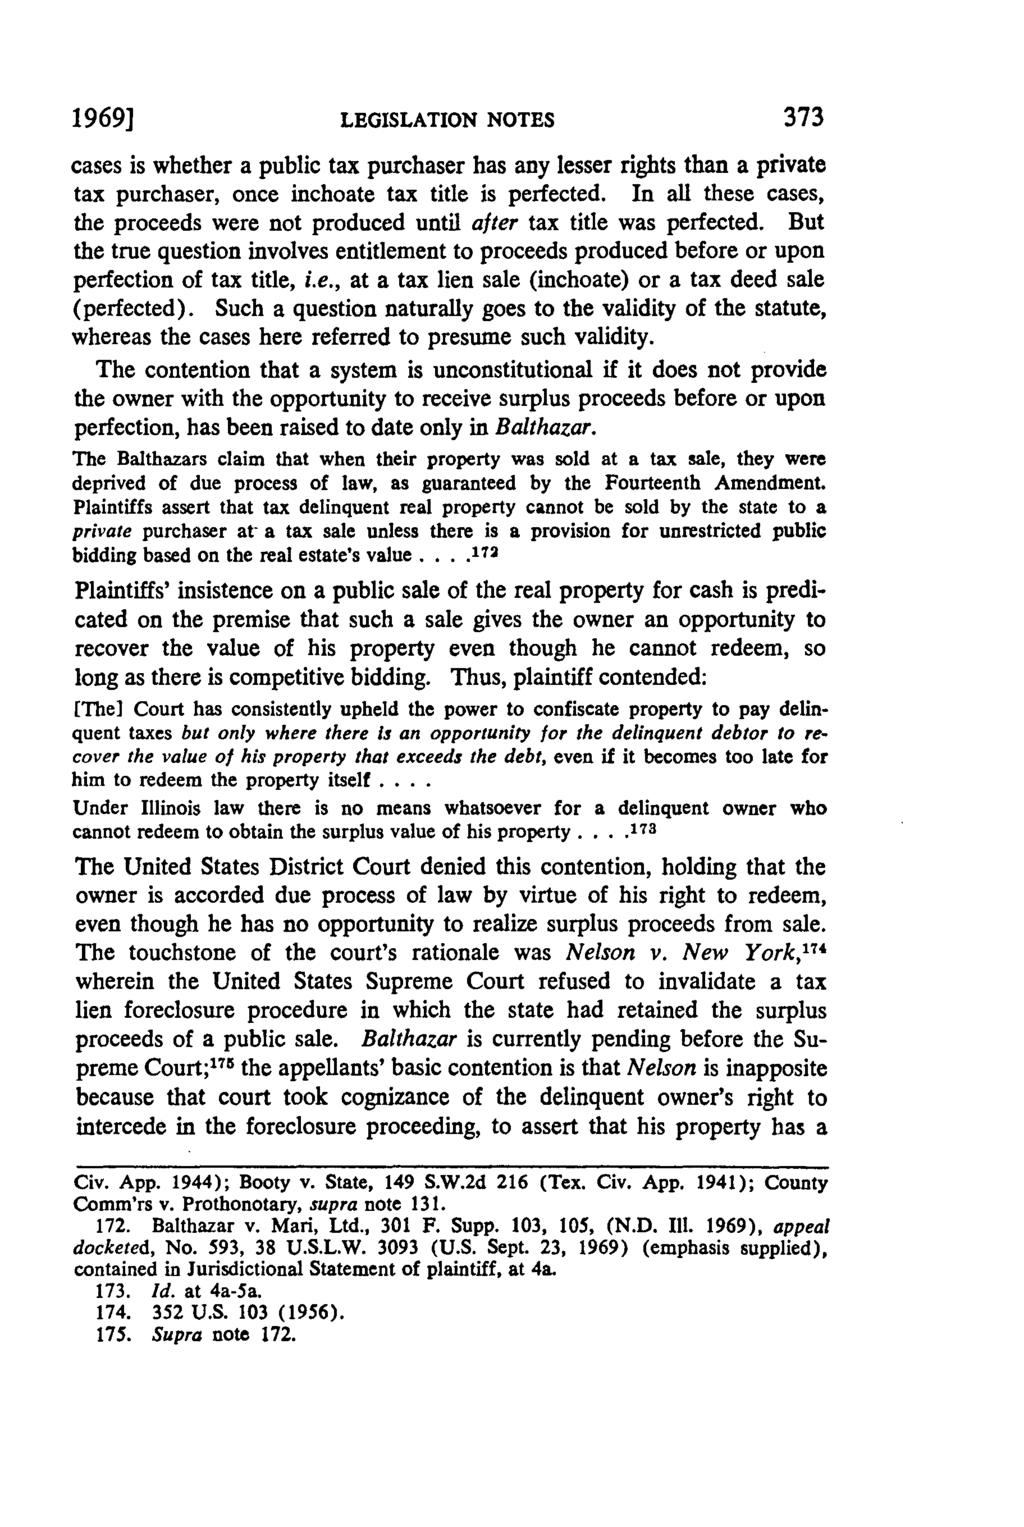 1969] LEGISLATION NOTES cases is whether a public tax purchaser has any lesser rights than a private tax purchaser, once inchoate tax title is perfected.